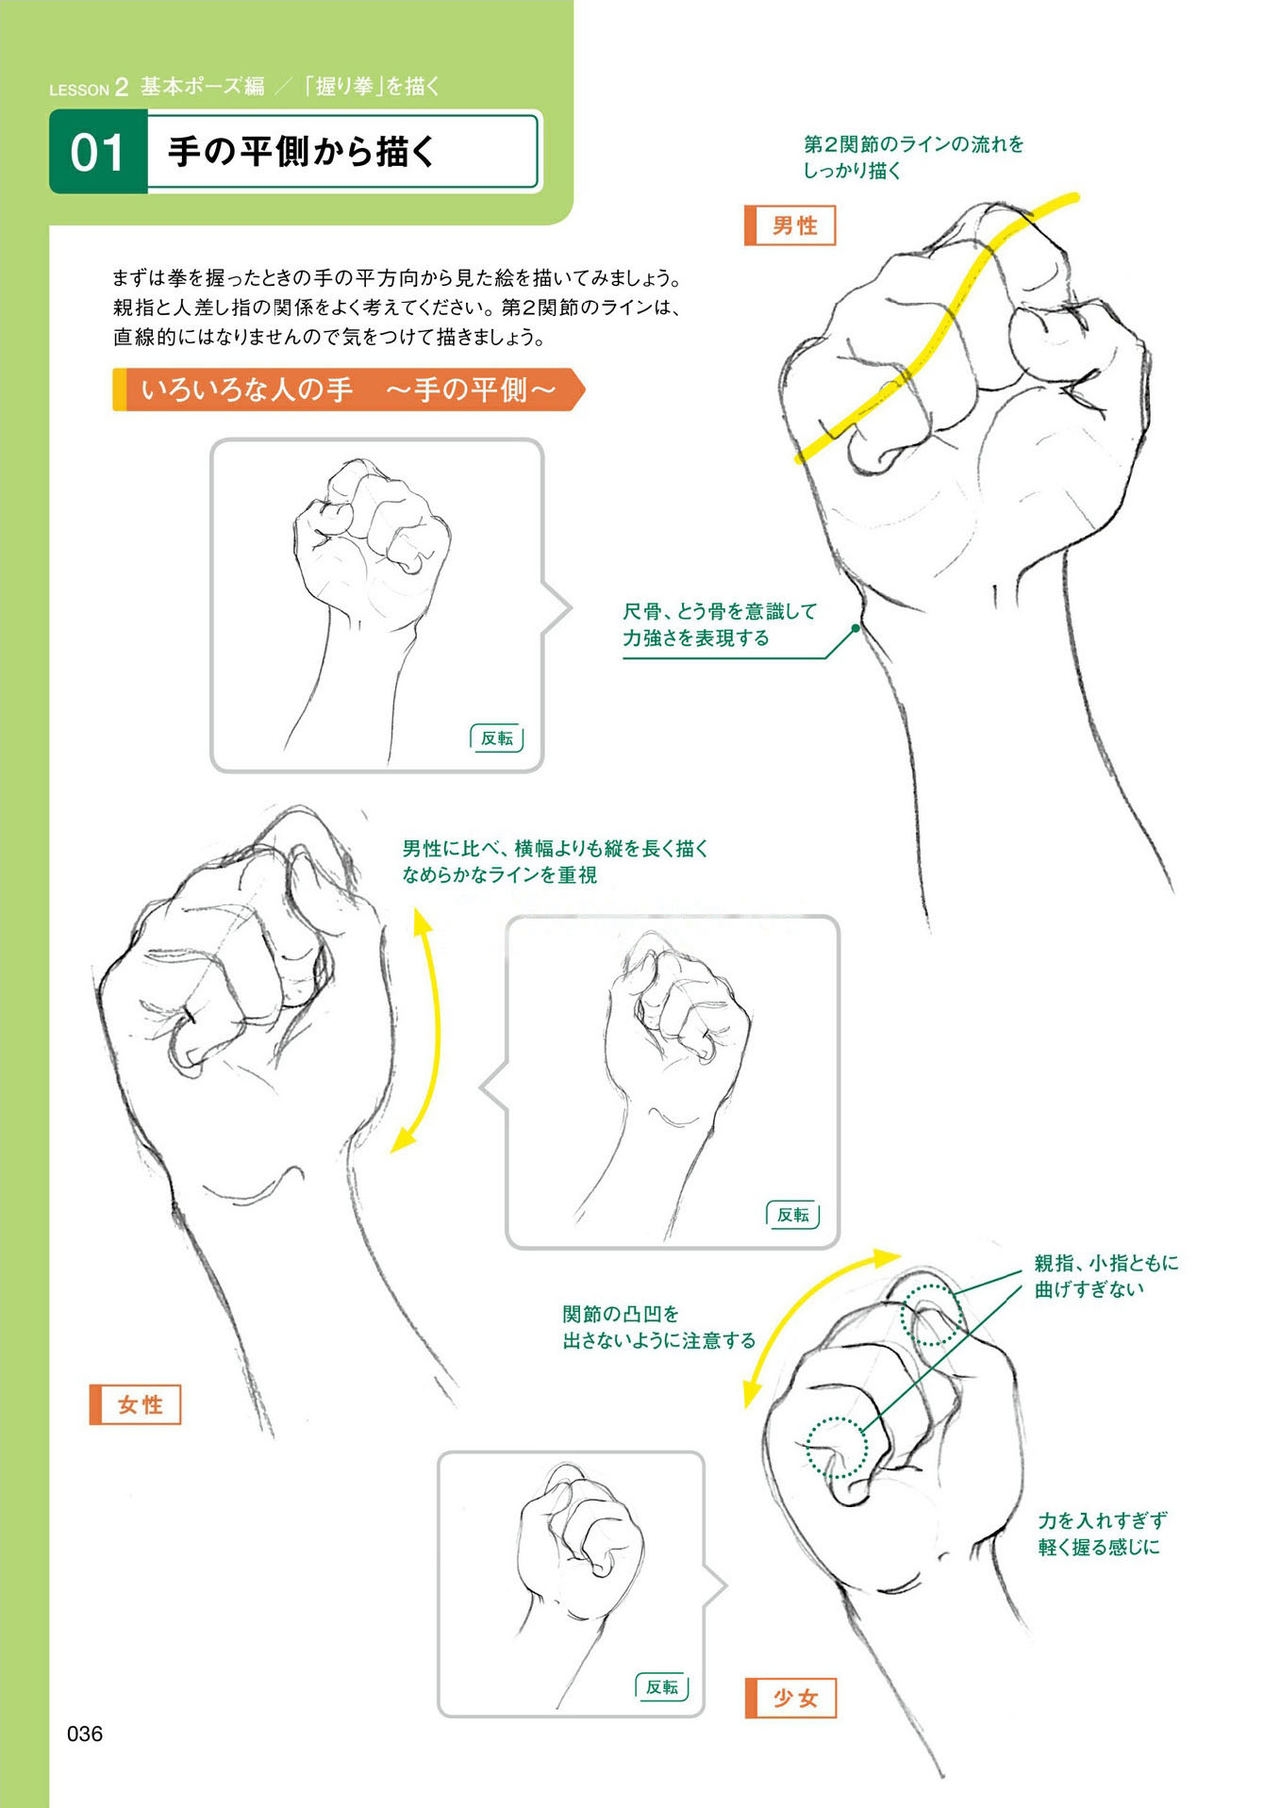 How to draw hands 36